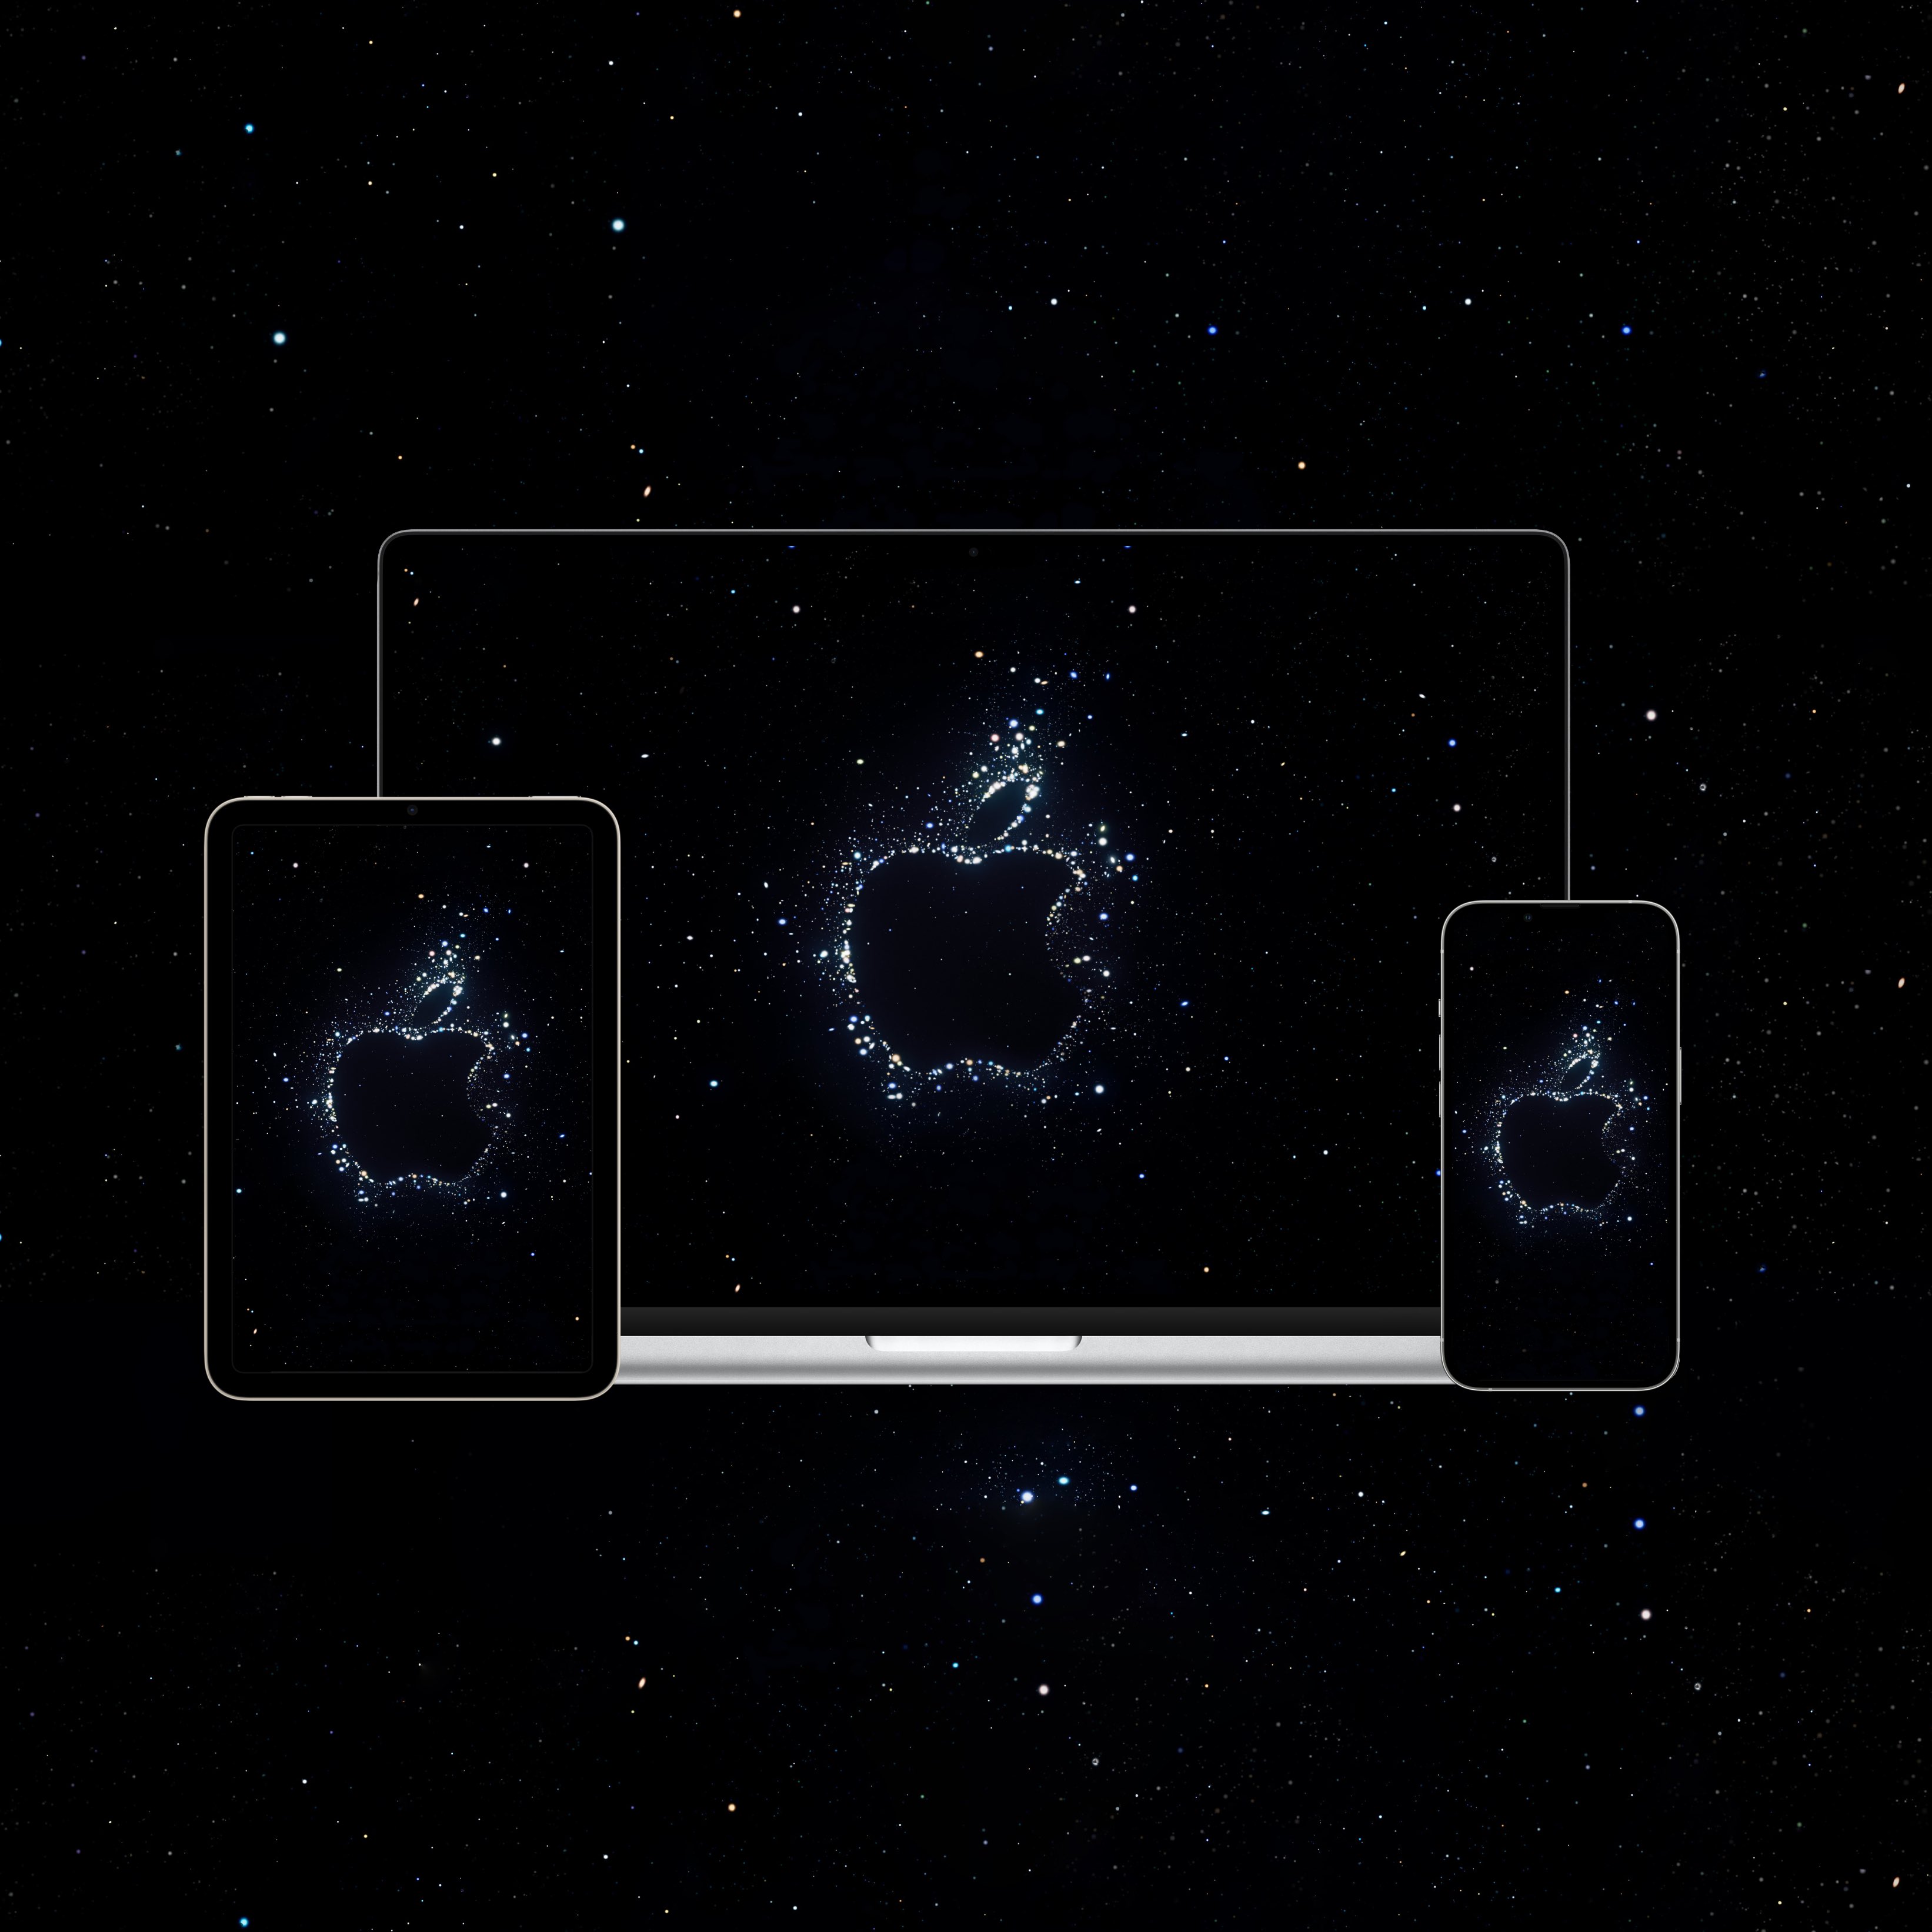 Apple's "Far out" event wallpapers for